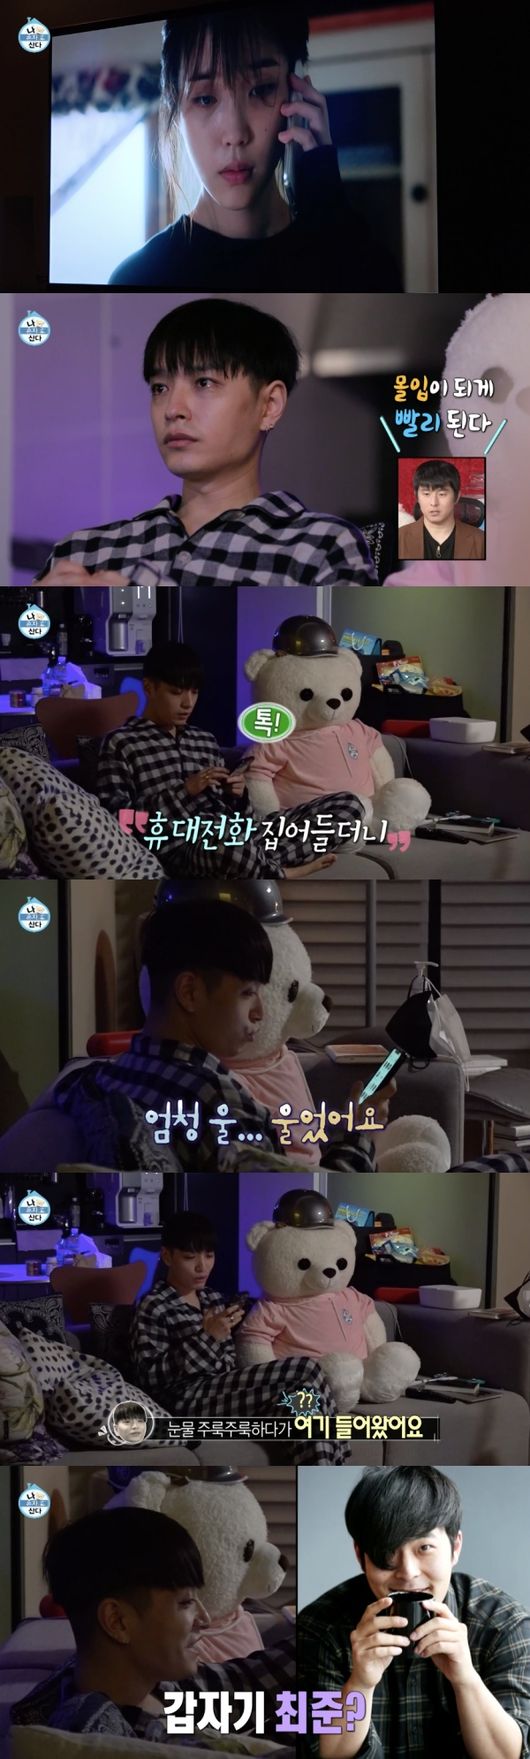 I Live Alone is getting public opinion over the fake IU controversy, and it seems that viewers Oneness is getting bigger in the singer IU (IU) who was mentioned without appearing.In MBC entertainment program I Live Alone broadcast on the 18th, singers Love and Simon Dominic released their daily lives.Among them, the conversation between Love, Simon Dominic and fake IU was at the center of the controversy.Simon Dominic took a break from the broadcast on the day and watched the drama My Man from Nowhere, which singer IU played as an actor Lee Ji Eun.After Drama finished, he took his cell phone and started talking, Mr. IU just cried, Ive seen my last Man from Nowhere.So I was surprised to hear the answer to the voice of IU, Oh, really, youve seen it. Because Simon Dominic seemed to be talking to the actual IU.But Simon Dominics call-to-call was not IU: someone who mimicked the voice of IU on social media.The social networking network Simon Dominic has spoken to was Sams ClubHouse, which has recently been spreading around celebrities.There are people who pretend to be the voice of celebrities with SNS that communicates only with voice.Simon Dominic also talked to someone who mimicked the voice of the IU.Actually Simon Dominic was introduced as the number one Korean follower in Sams ClubHouse, which made it possible to use it vigorously.Simon Dominic communicated with MBC announcer Kim Jun-sang (Kim Hae-joon) who imitates Choi Jun (Kim Hae-joon) in addition to IU, and another user who imitates iPhone artificial intelligence voice Siri on the same day.One user asked Simon Dominic to read and read a young rap.As the controversy grew, the production team of I Live Alone deleted the part from the rebroadcast, allowing only Chois voice to appear immediately without the voice of fake IU.However, I Live Alone does not disclose its official position.As there was no explanation for Sams ClubHouse, it is said that they do not feel the need for additional explanation.Nevertheless, the controversy over fake IU continues to spread. It is time to see how the criticism of viewers toward I Live Alone will be distracted.MBC screen.